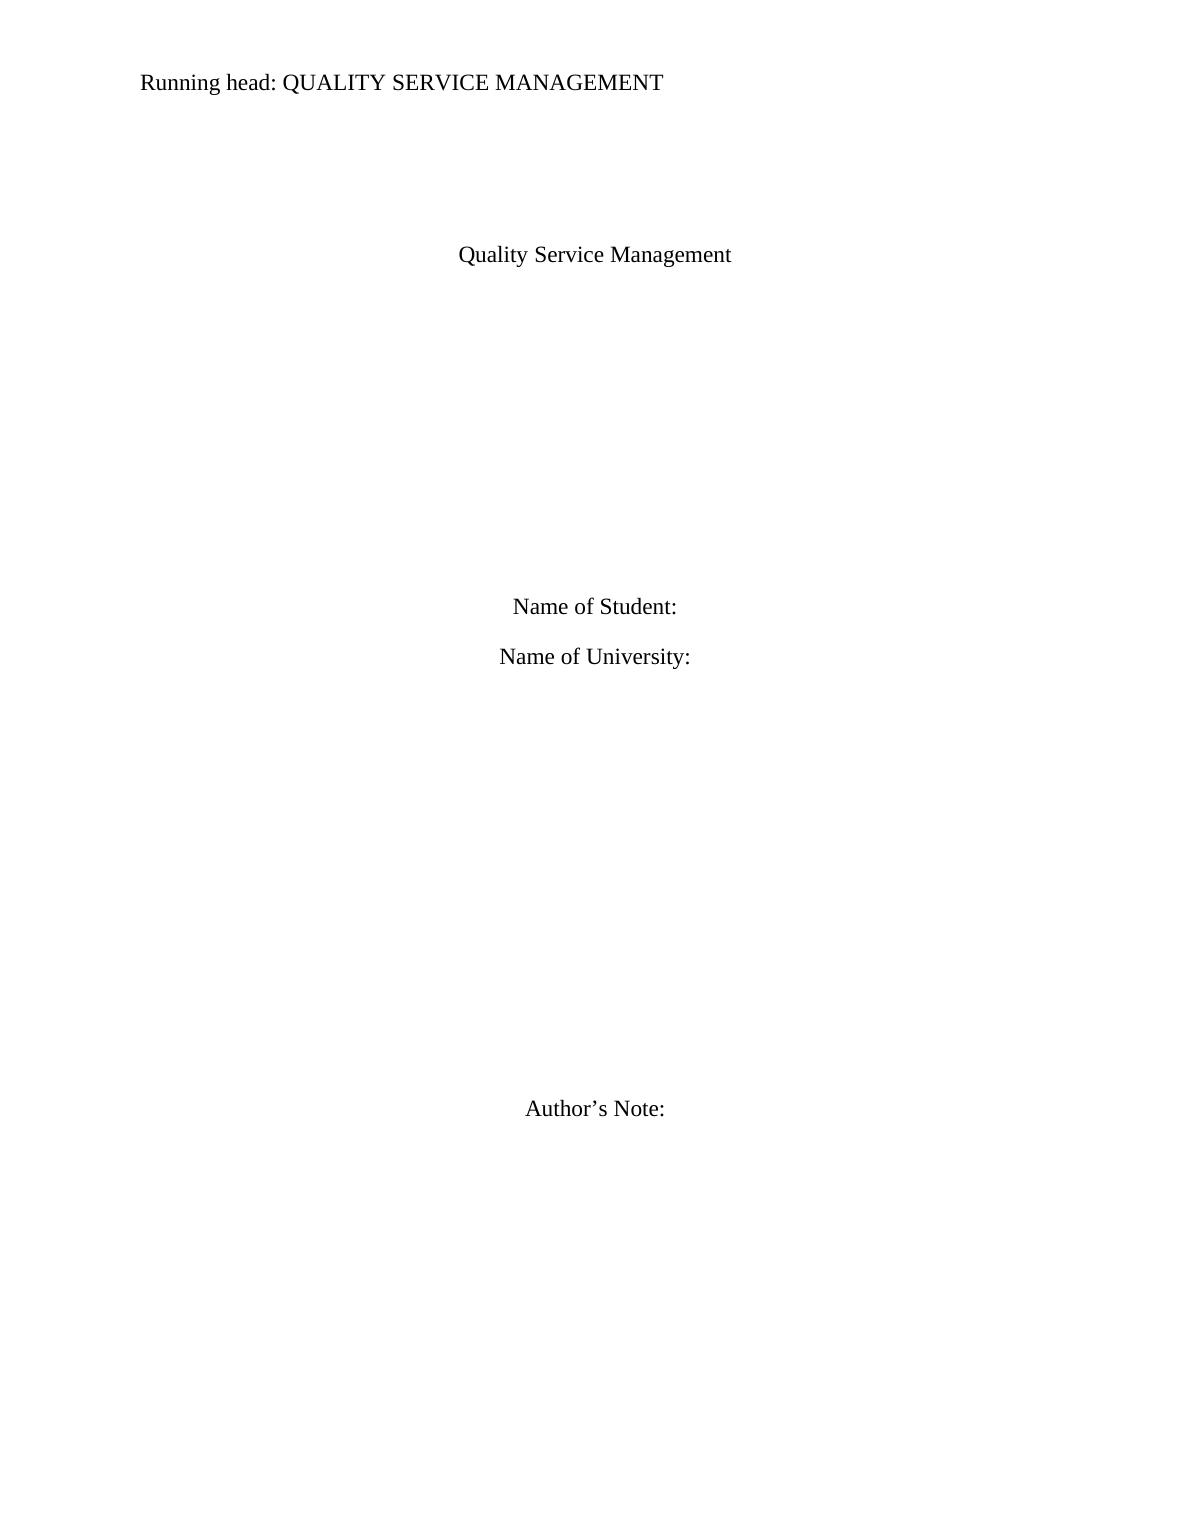 Quality Service Management Assignment_1